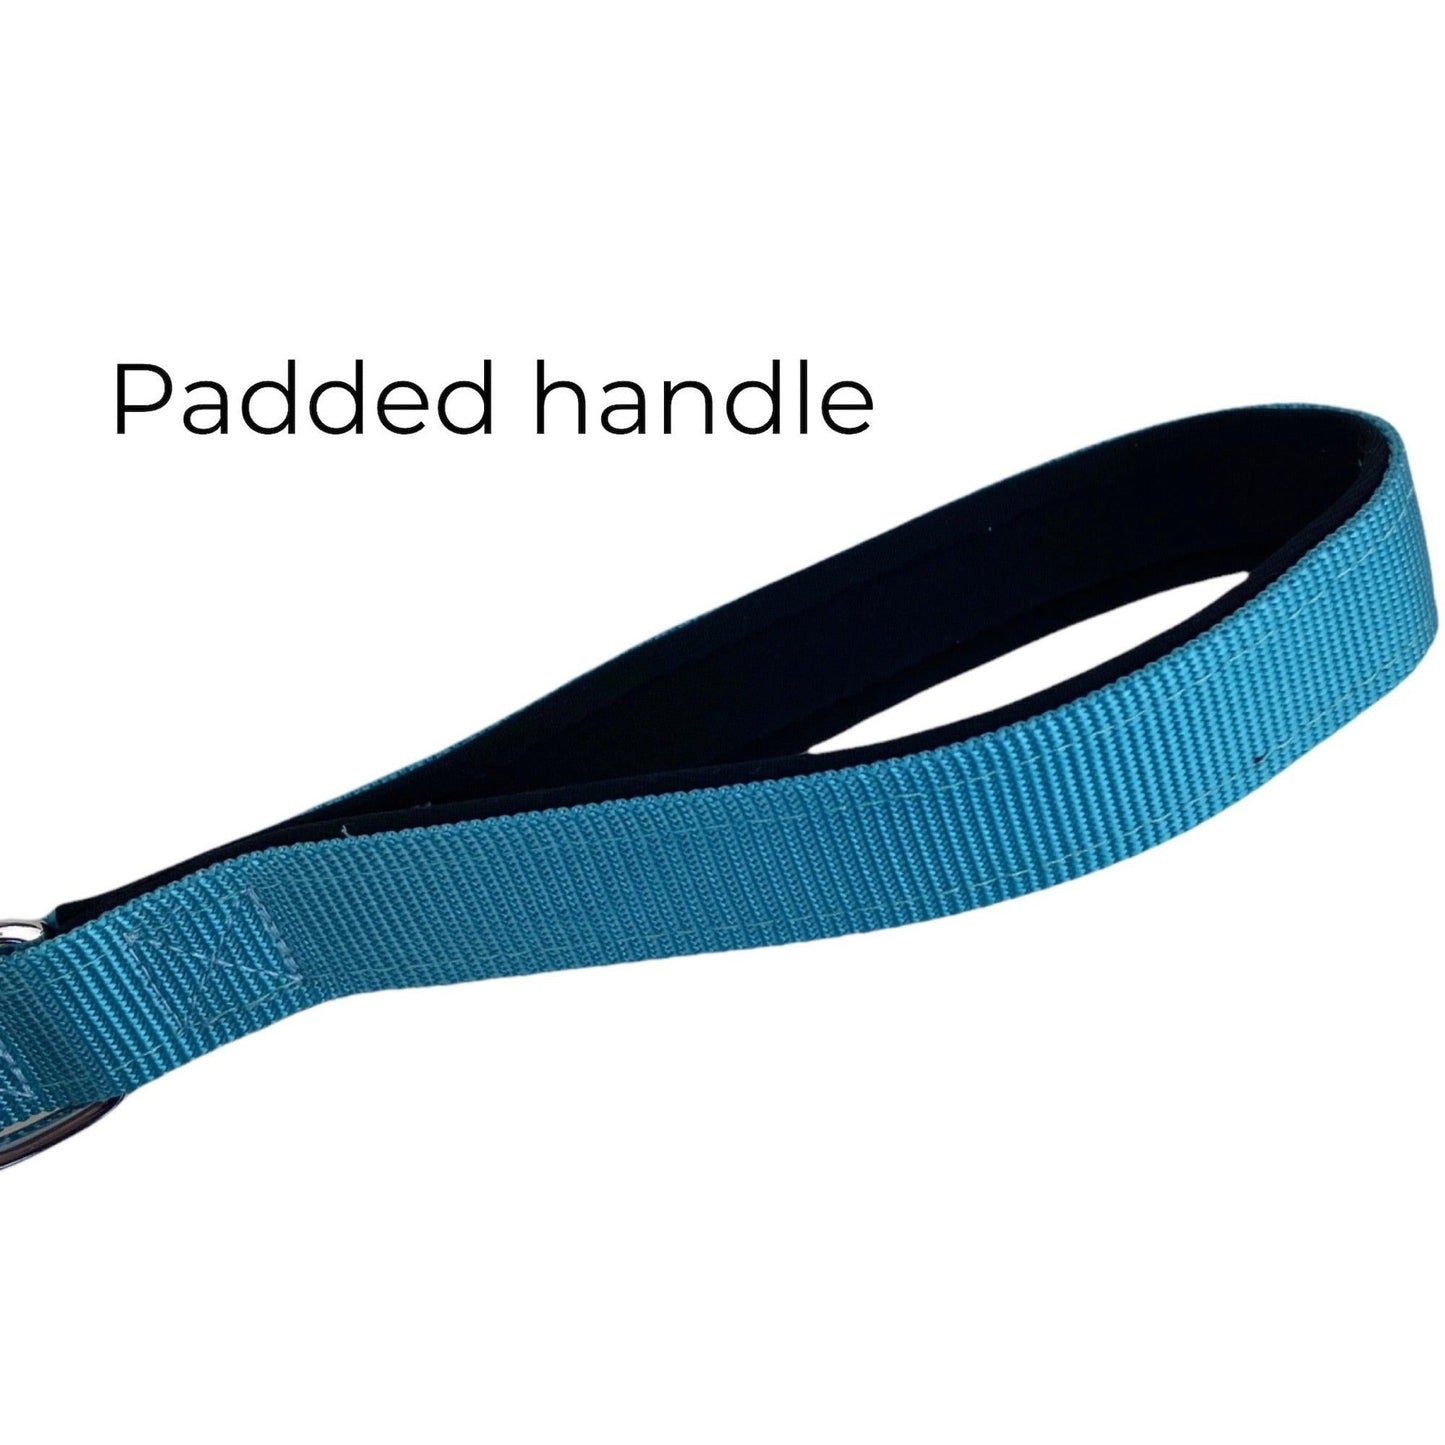 A close up photo of a teal blue leash handle that is padded - by fearless pet